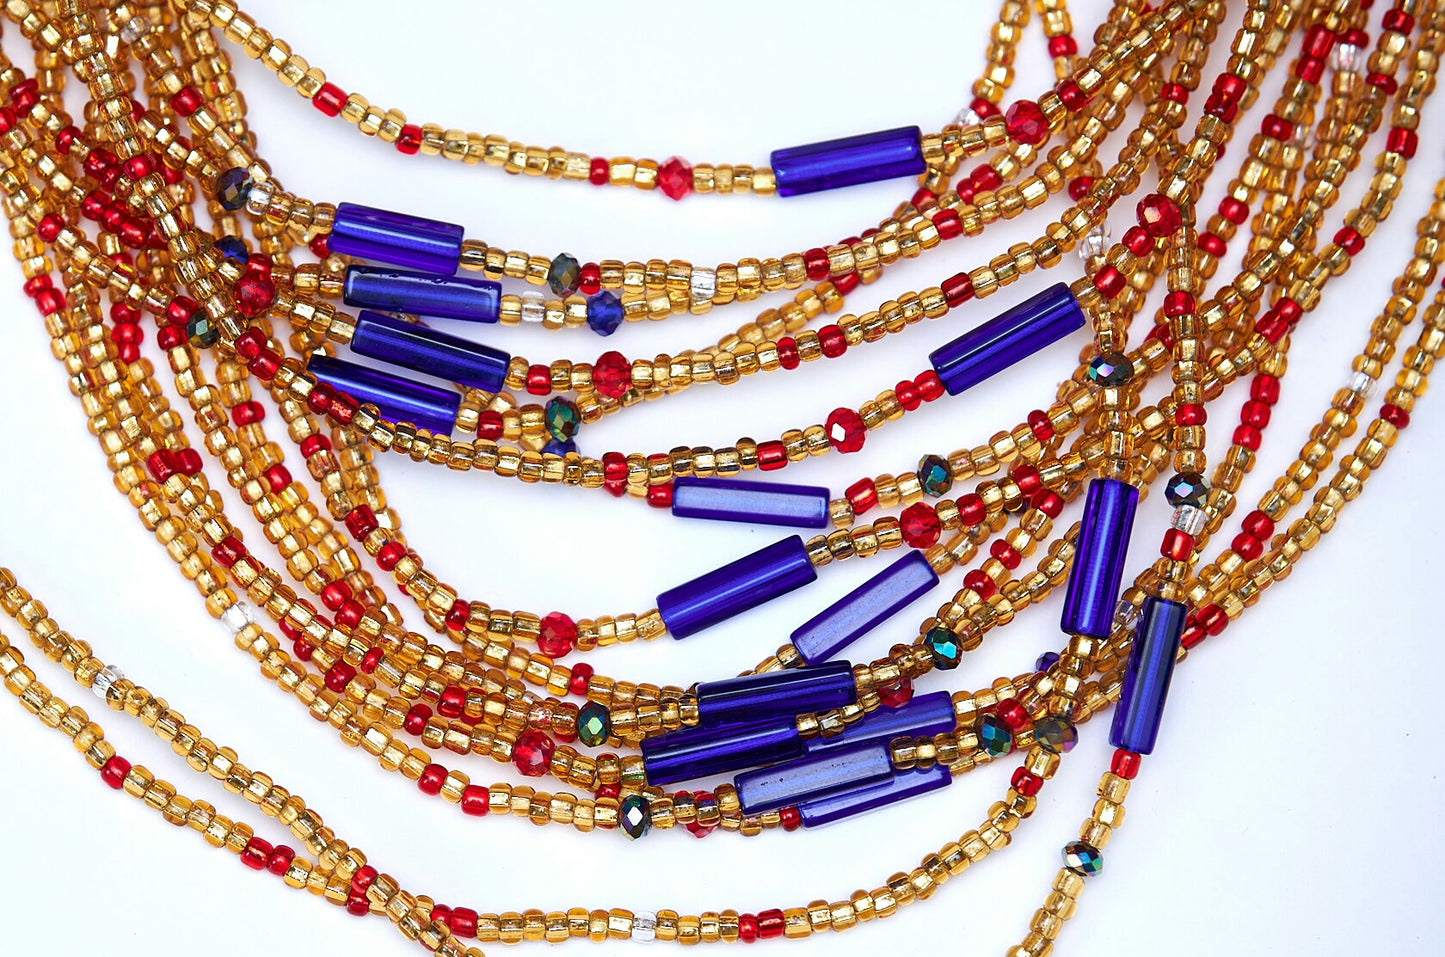 44 Inches Red And Gold Beads With Red, Green and Blue Pebble Bars Tie on Waist Beads